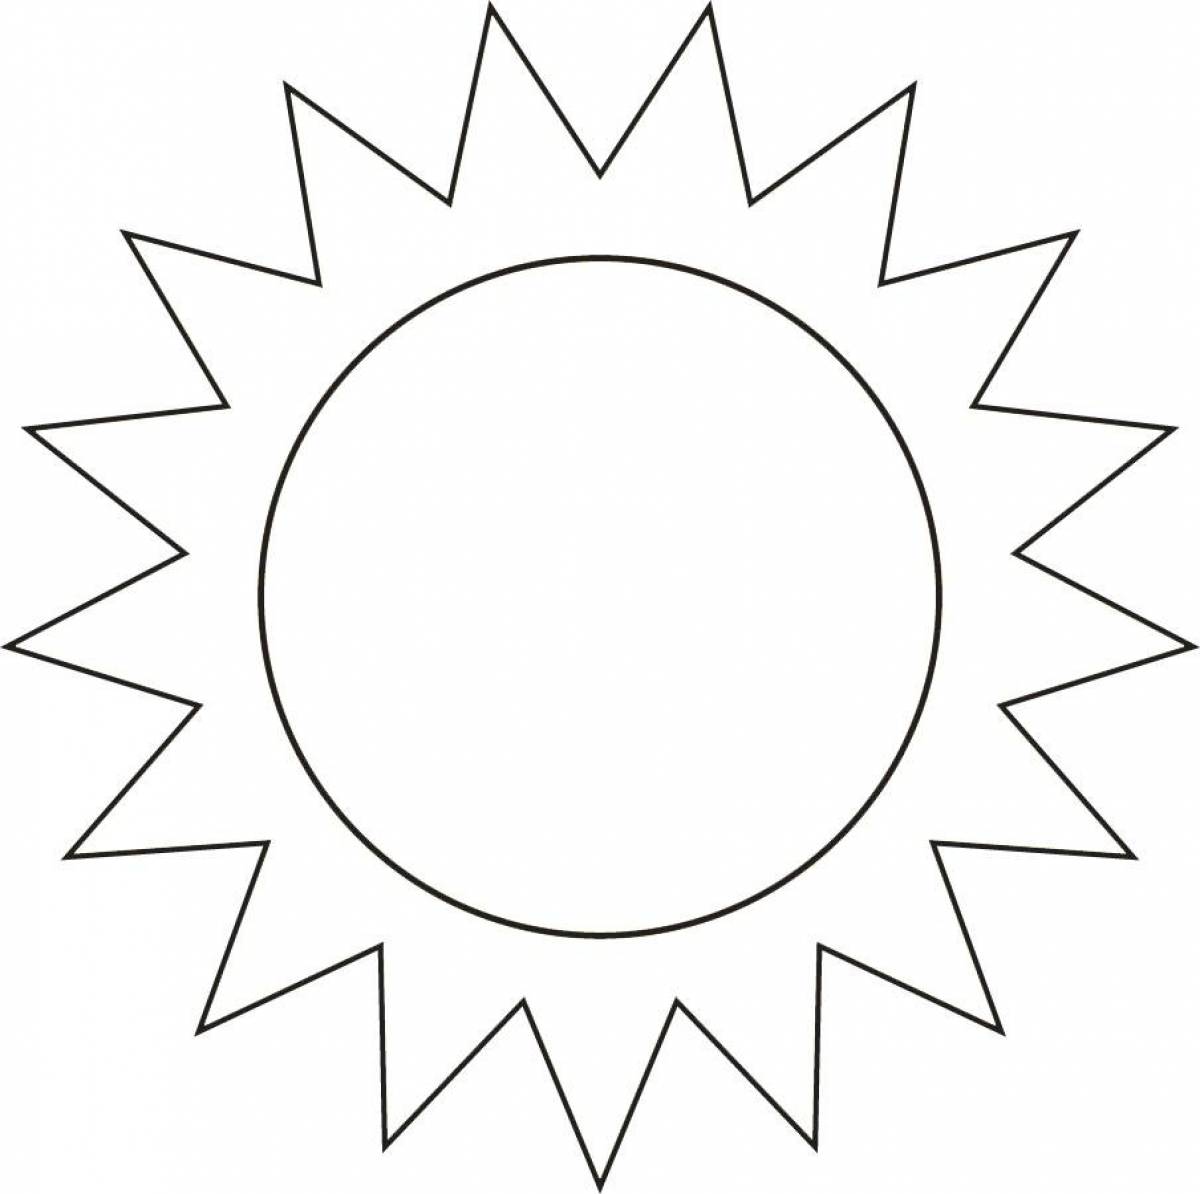 Dazzling sun coloring book for kids